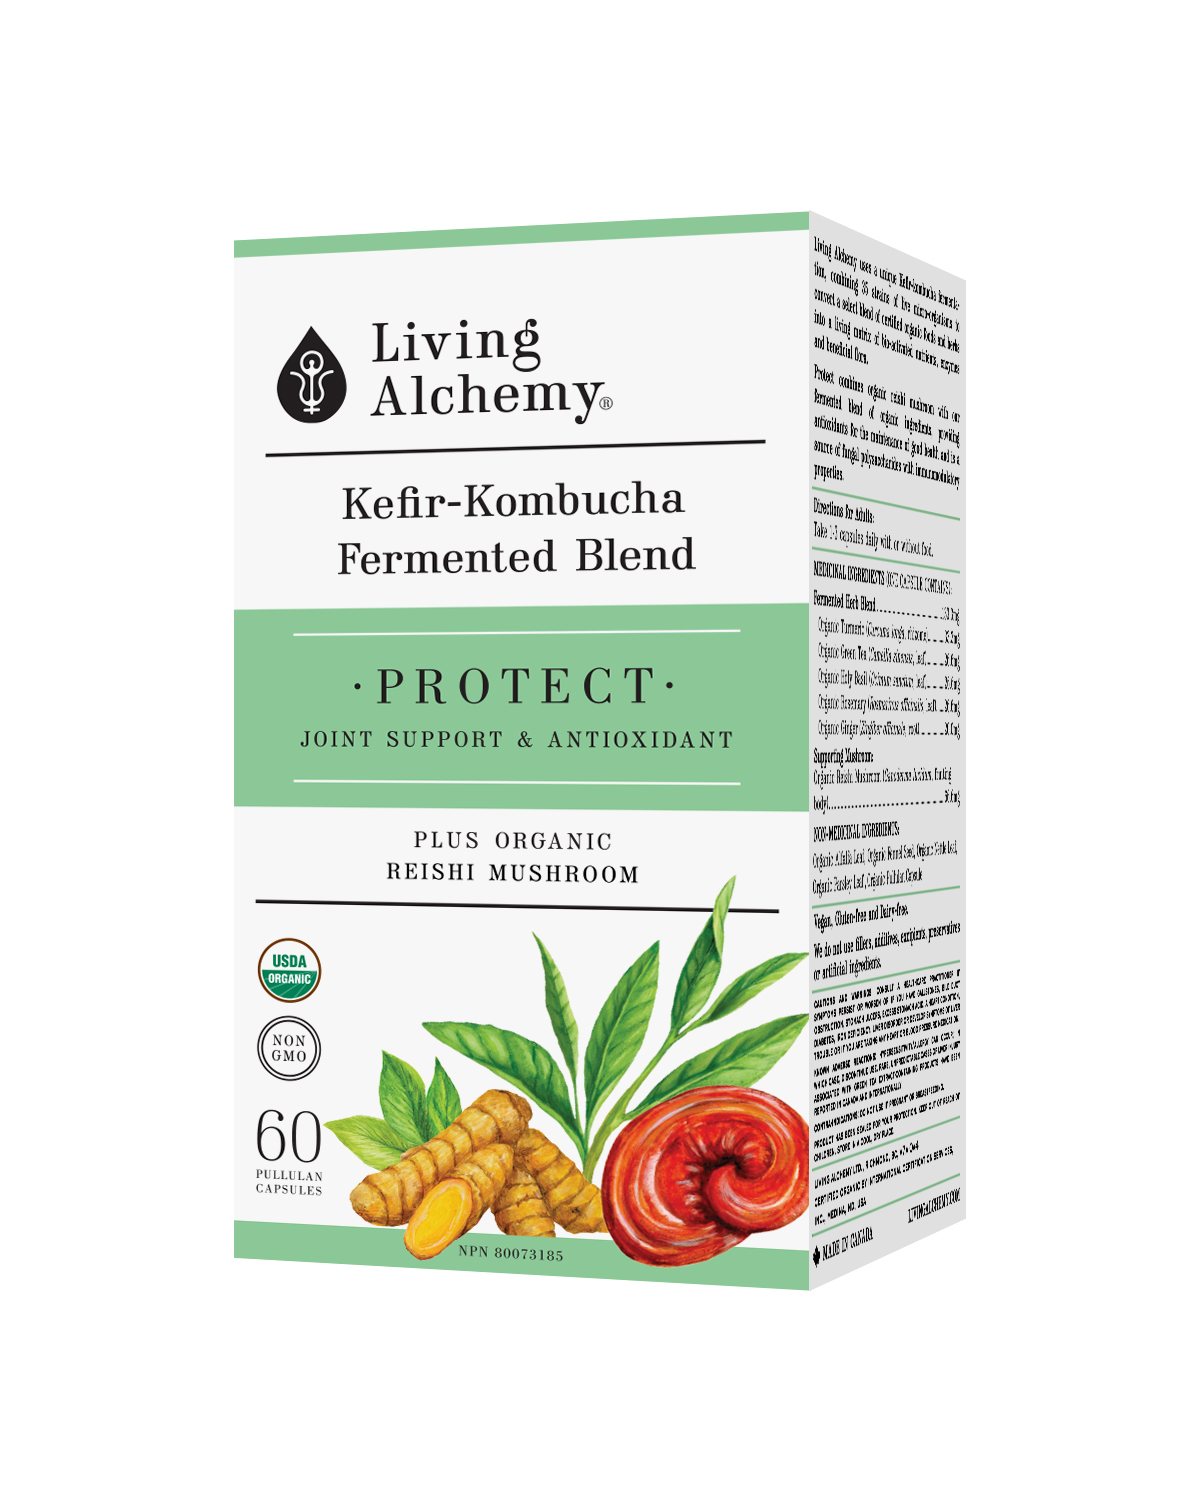 Living Alchemy Protect: Joint Support & Antioxidant 60 Pullulan Capsules